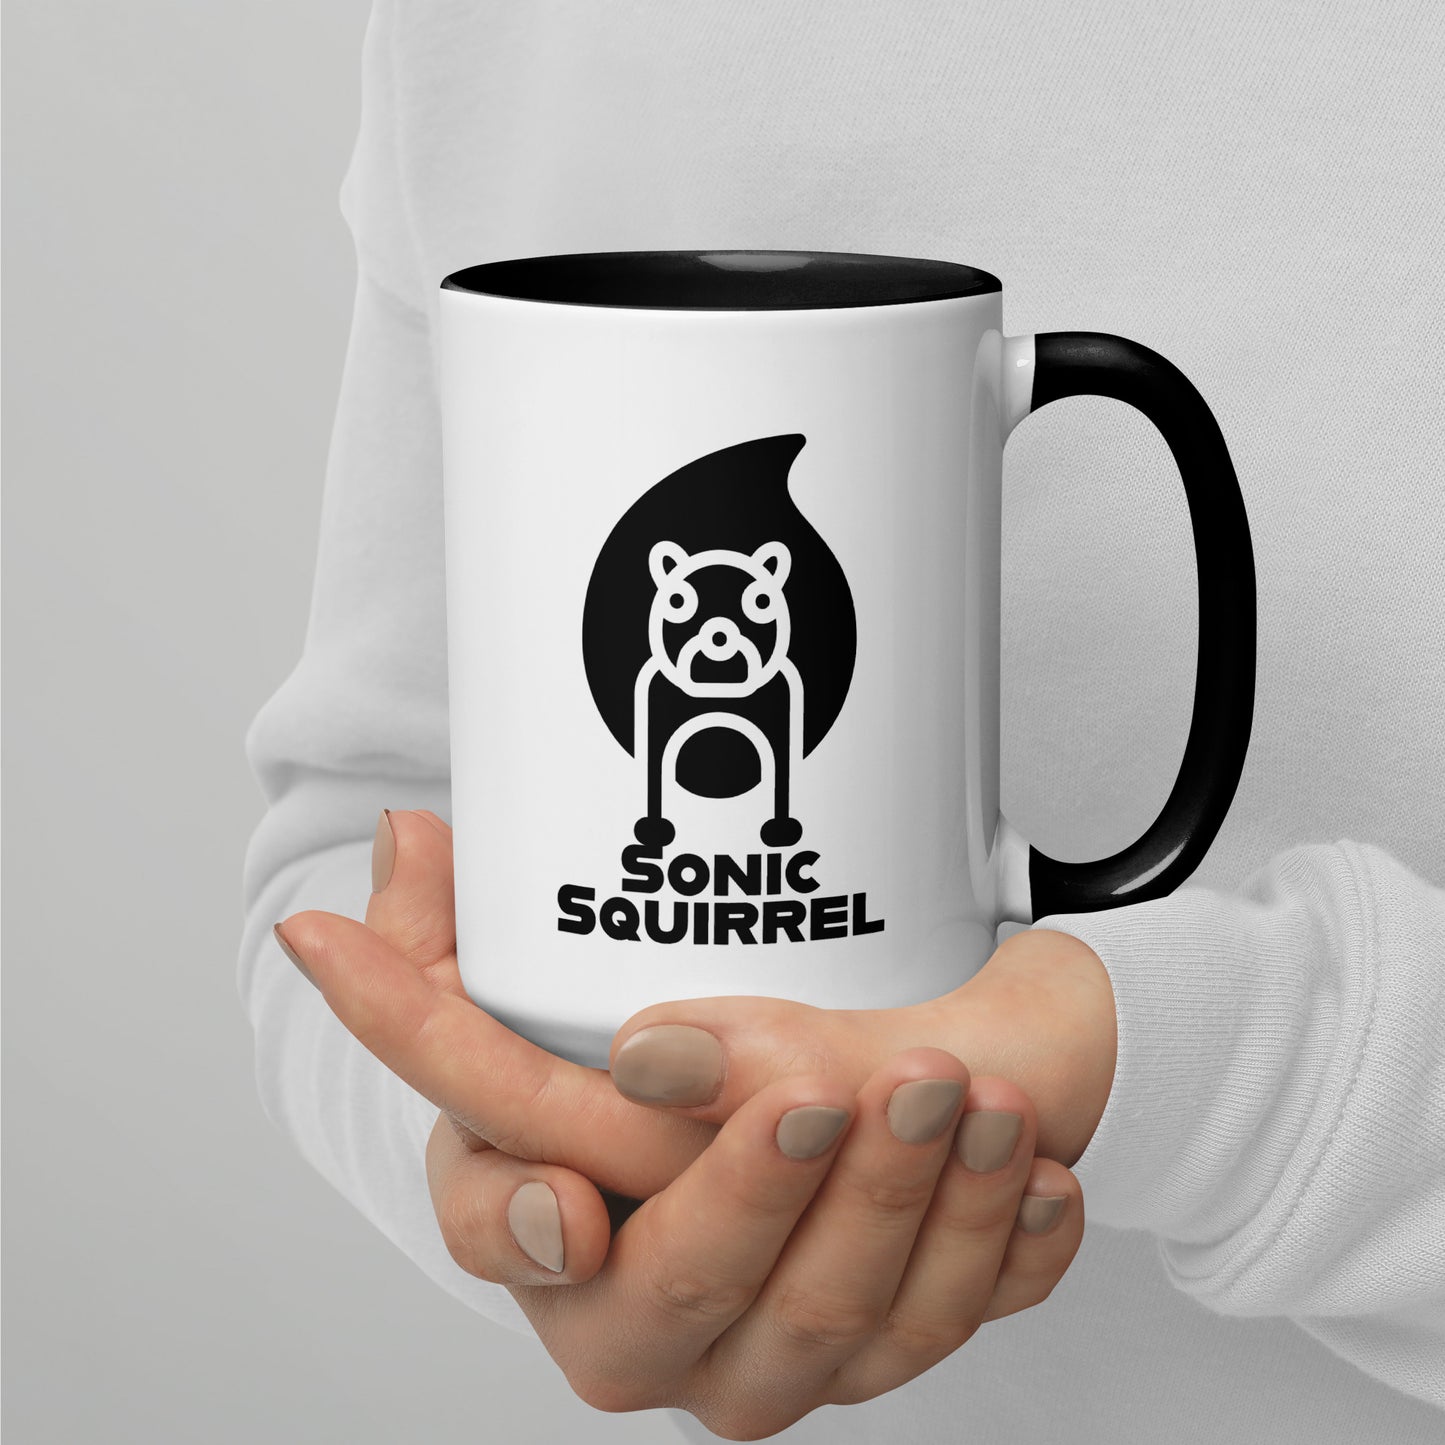 Sonic Squirrel Logo Mug With Color Inside